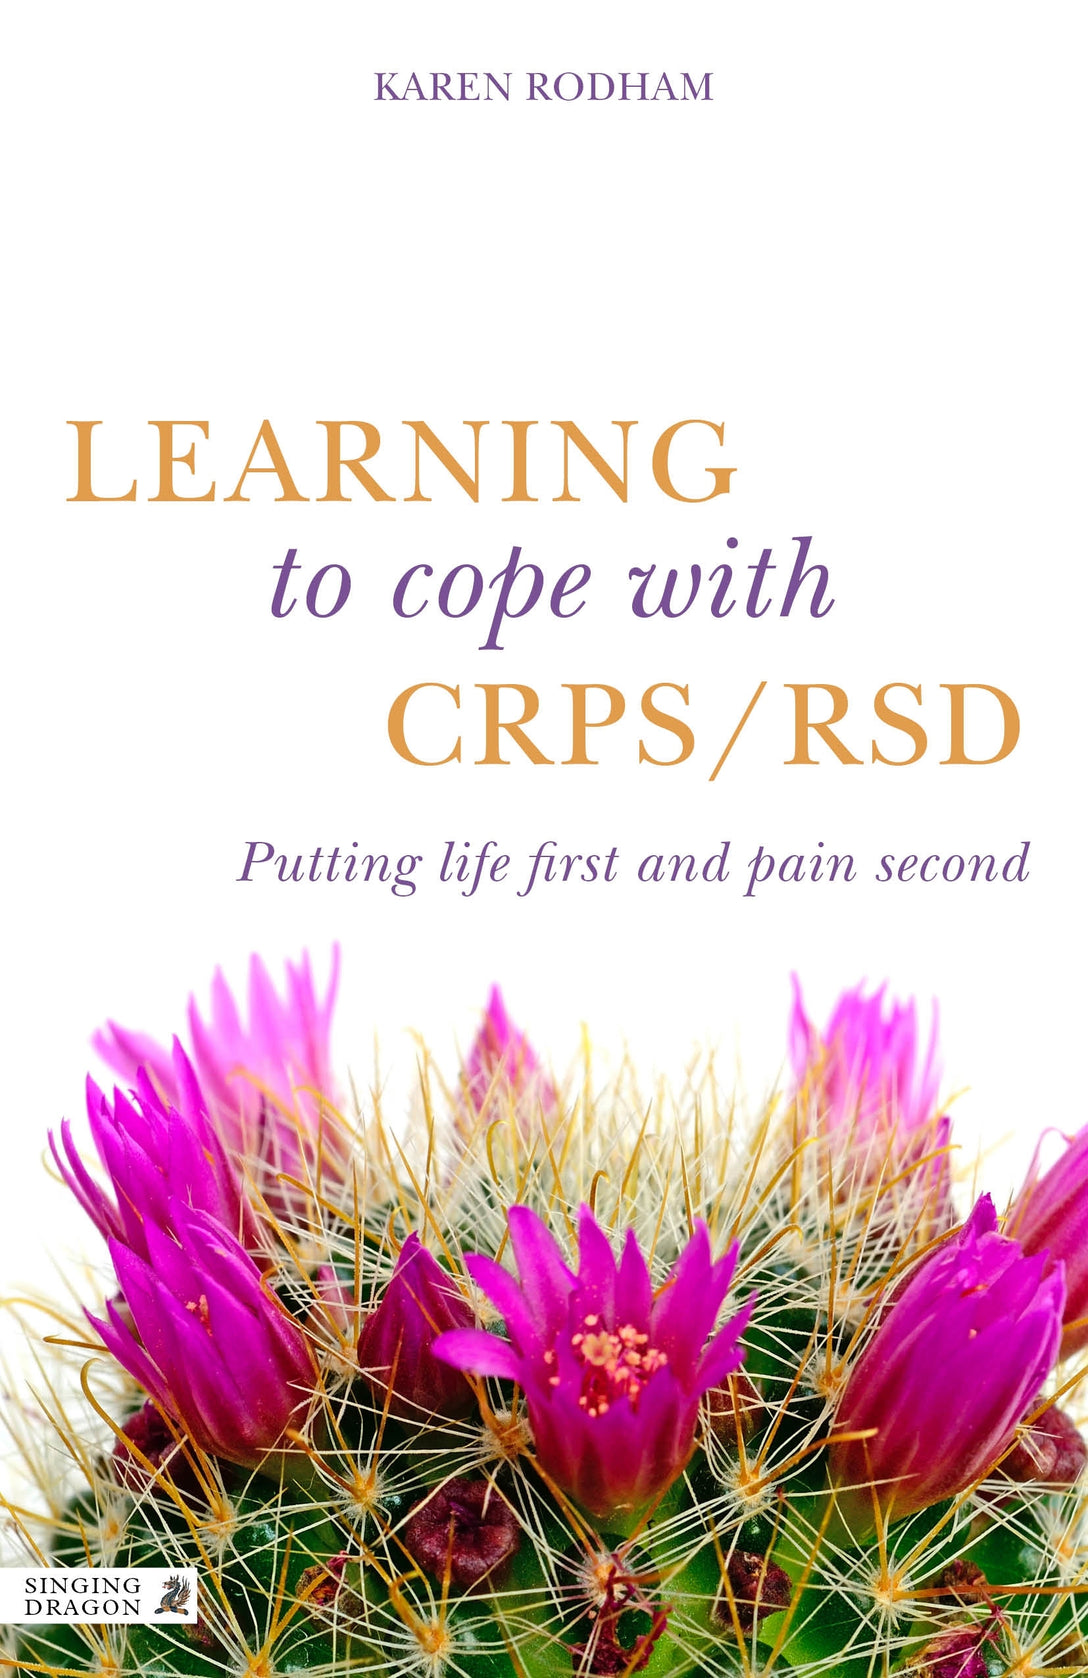 Learning to Cope with CRPS / RSD by Karen Rodham